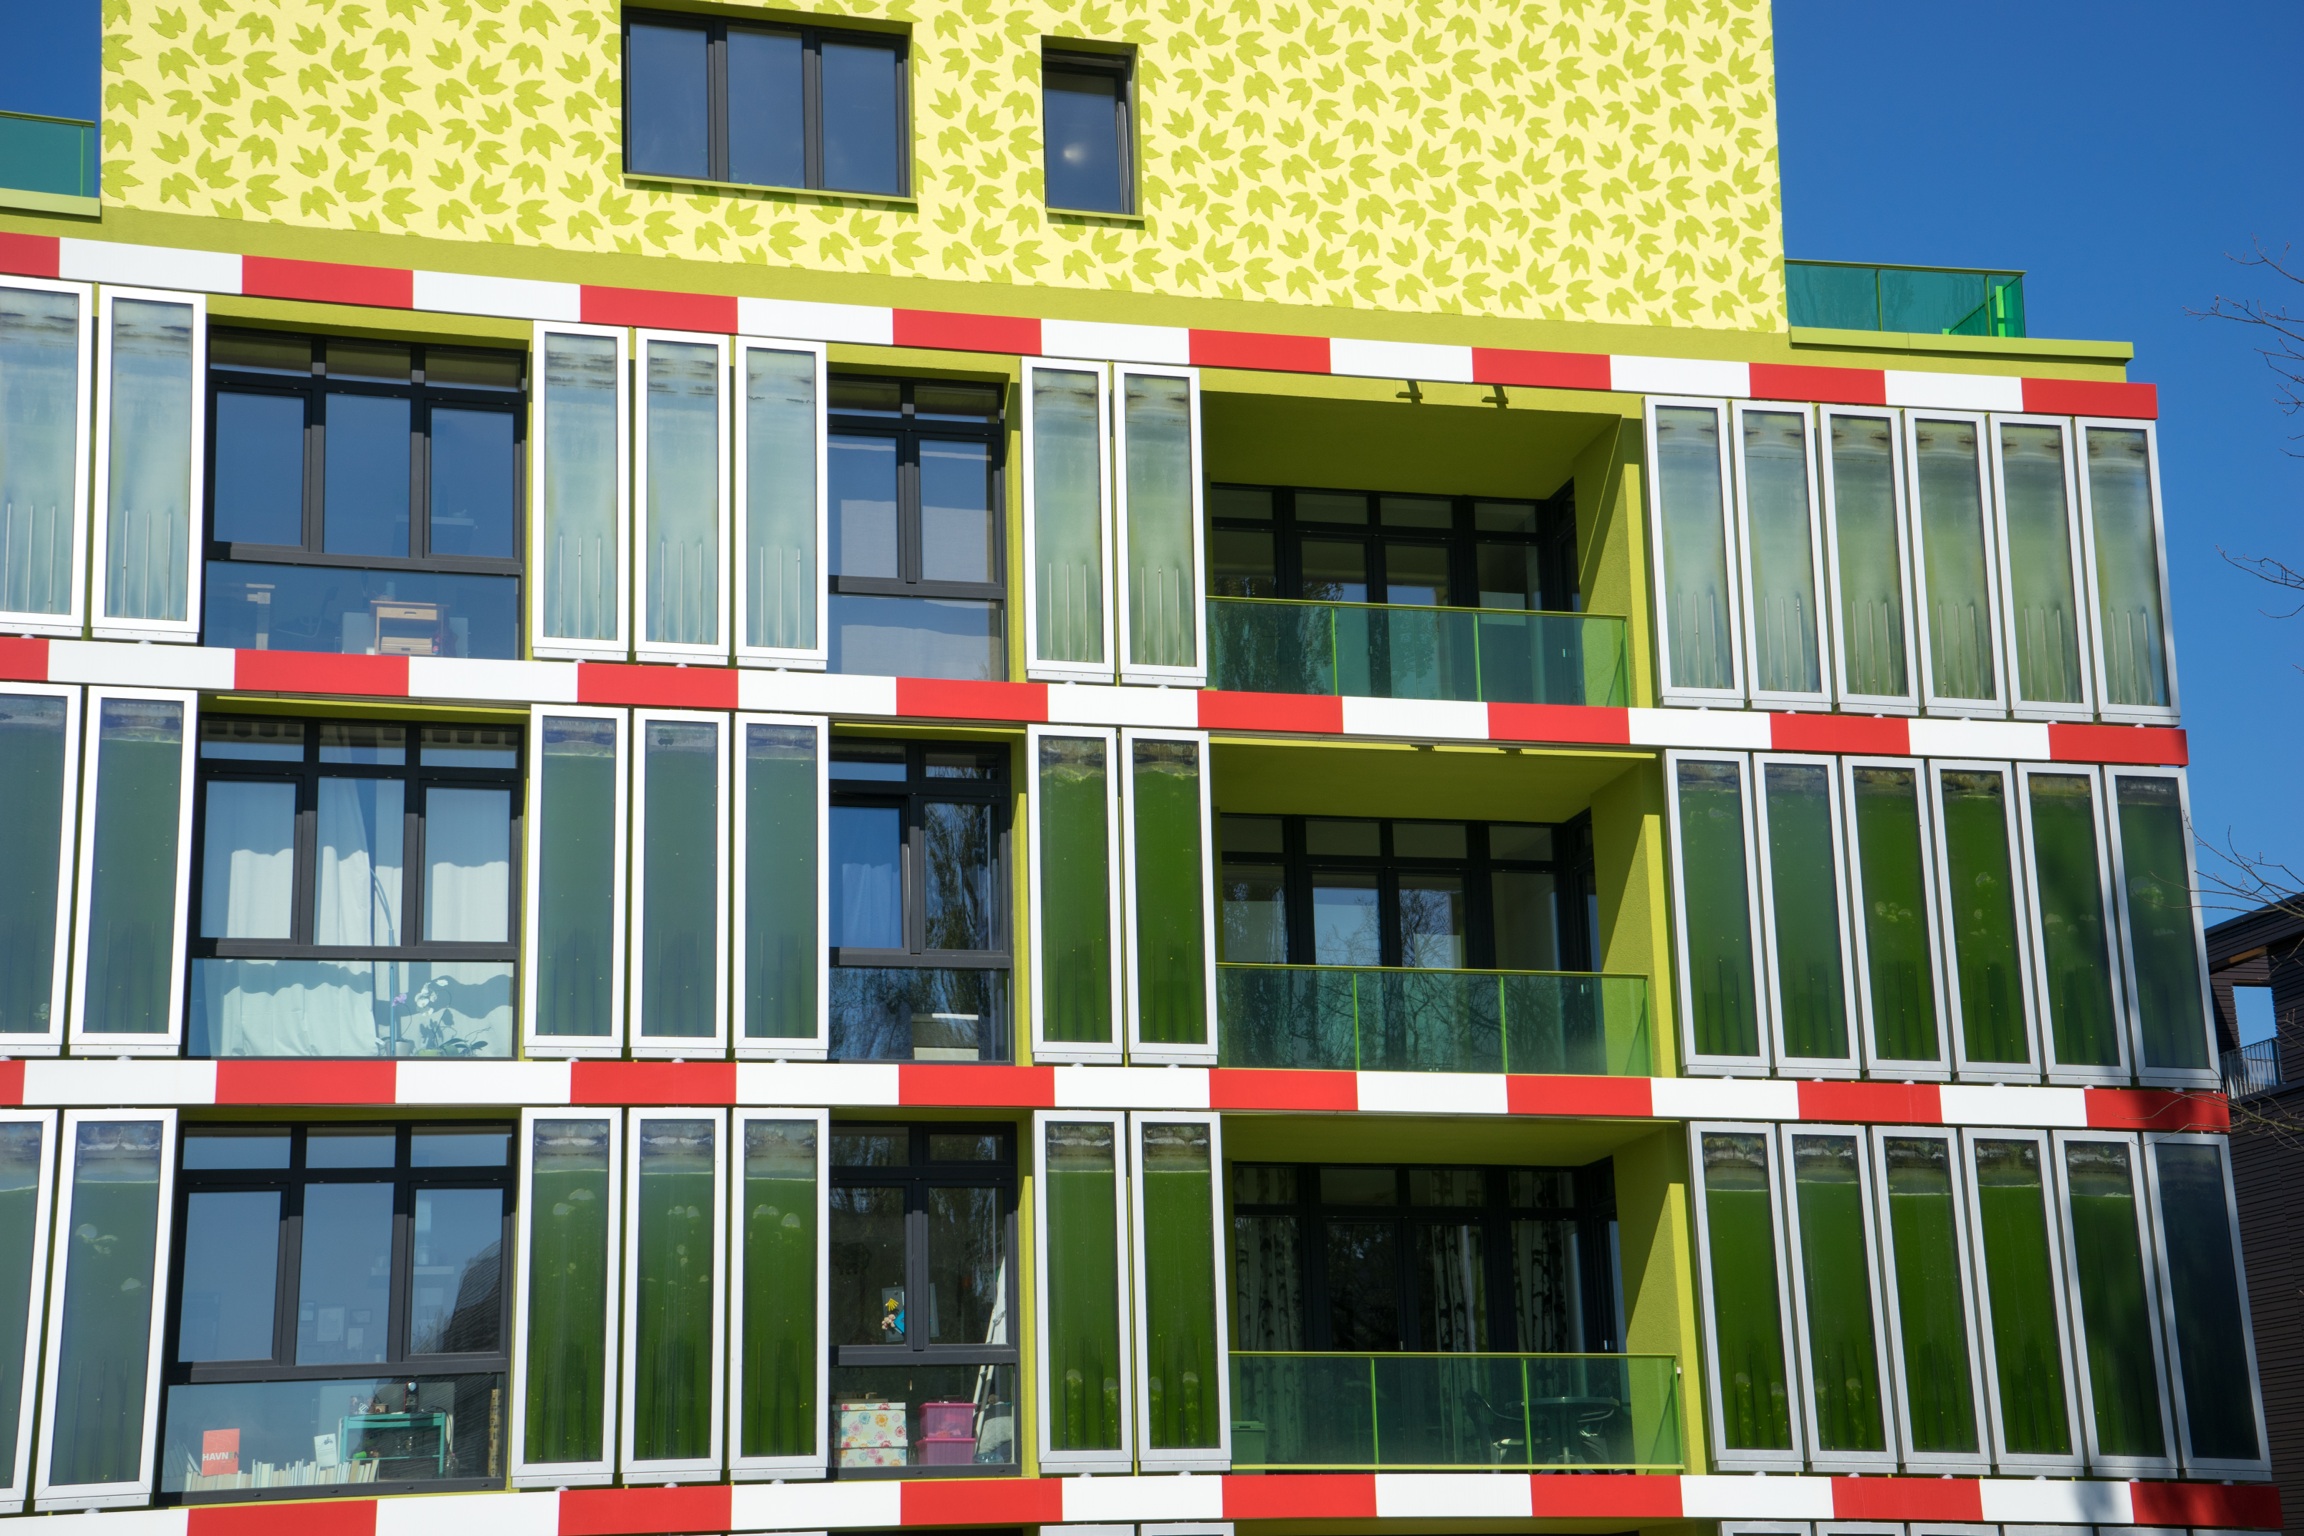 An apartment building with algae-filled panels that look like misted windows.